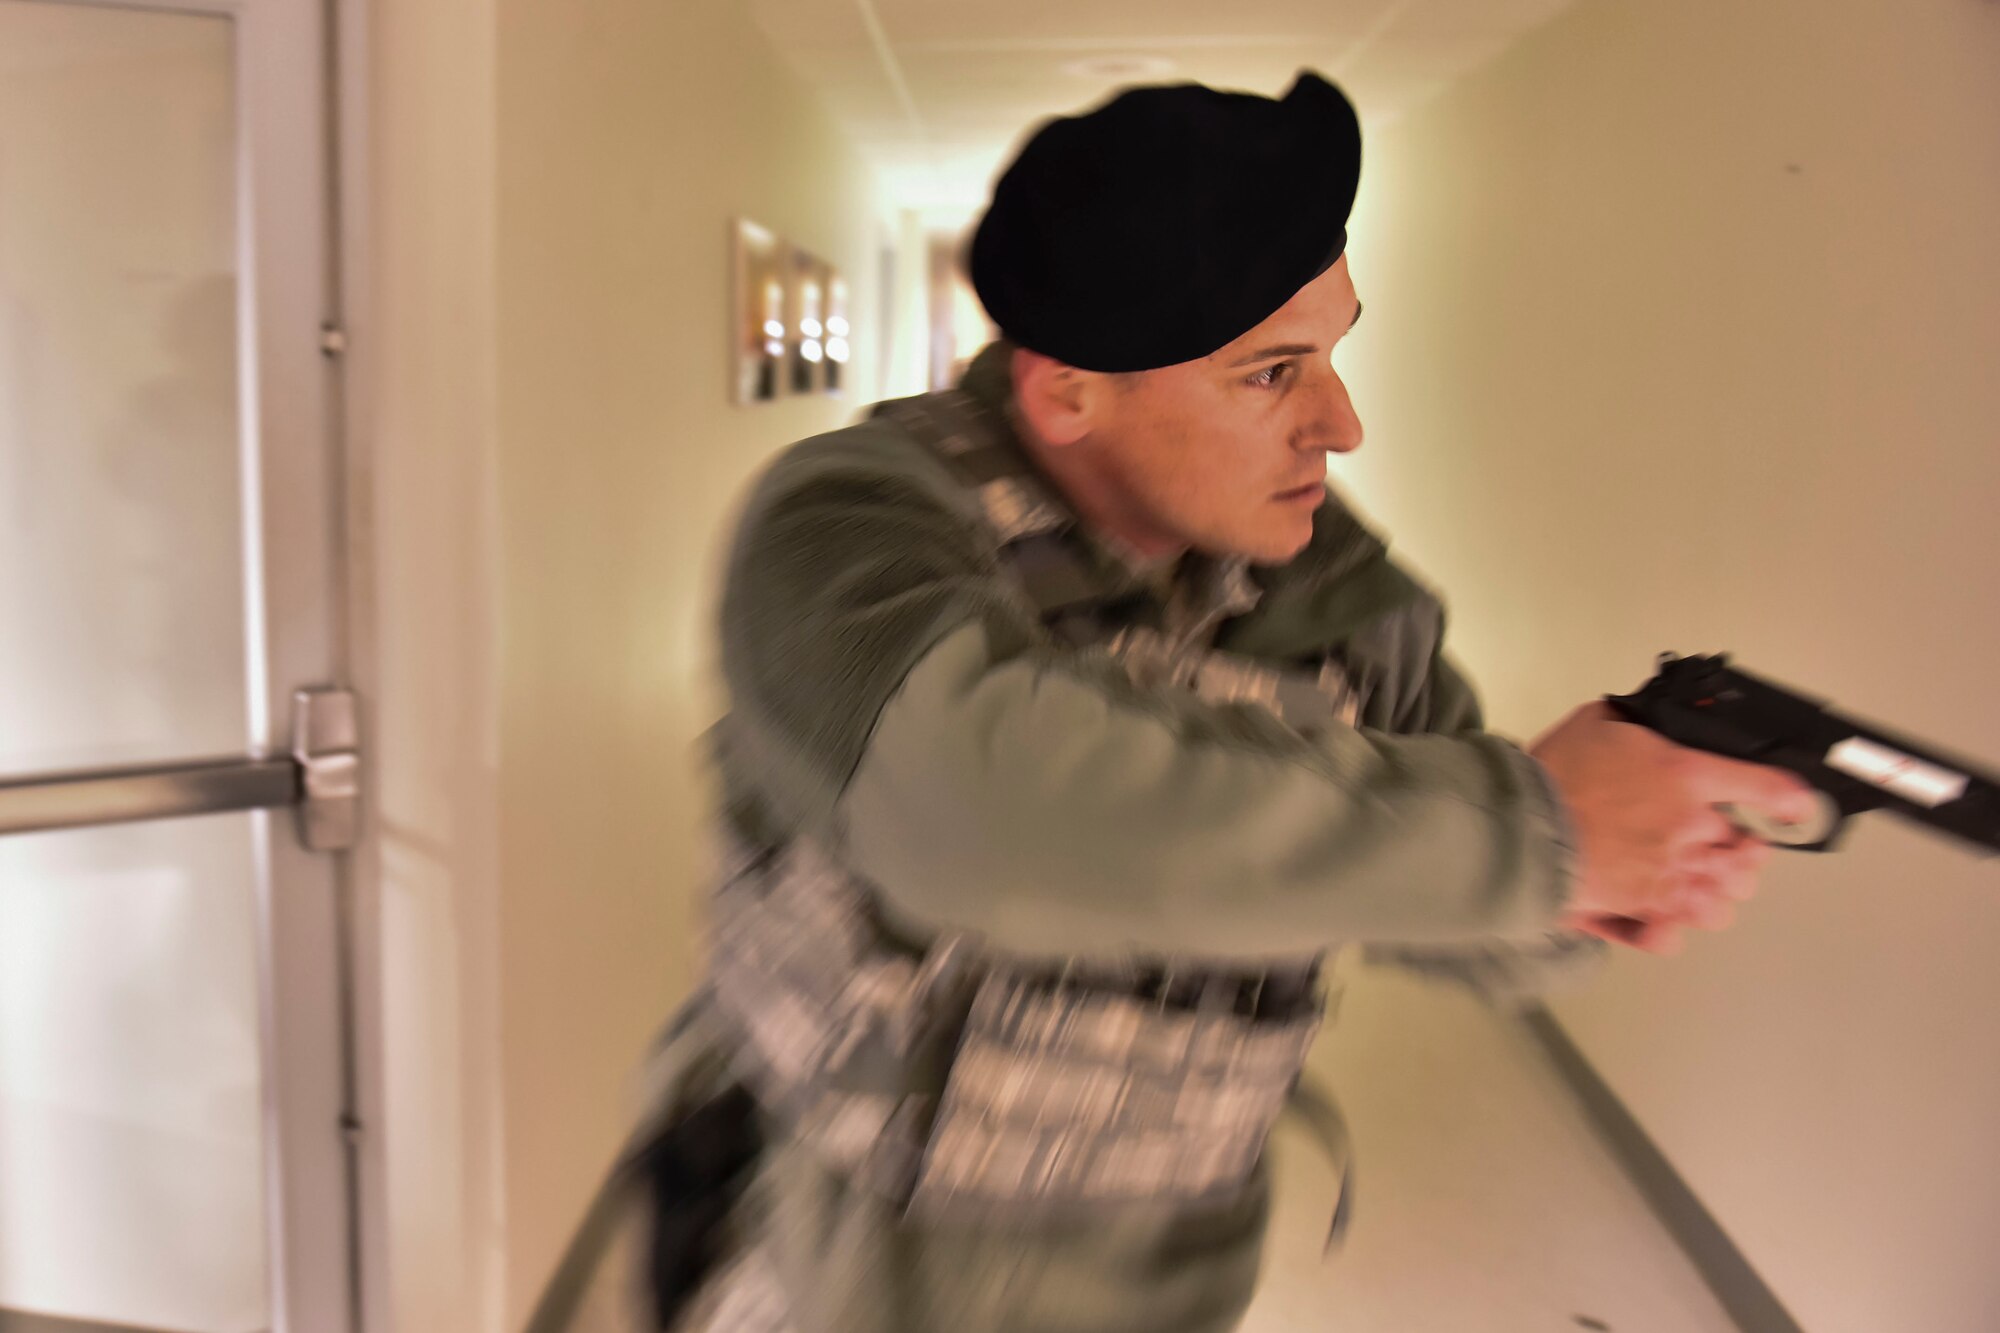 U.S. Air Force Master Sgt. Nick Muir, Security Forces specialist at the 180th Fighter Wing in Swanton, Ohio, enters a building on base after the initial sweep for suspects during an active shooter exercise on May 15, 2016. The 180th performed a base-wide active shooter response exercise and inspection to prepare Airmen to survive an incident on base or in their civilian lives. (Ohio Air National Guard photo by Tech. Sgt. Nic Kuetemeyer/released)